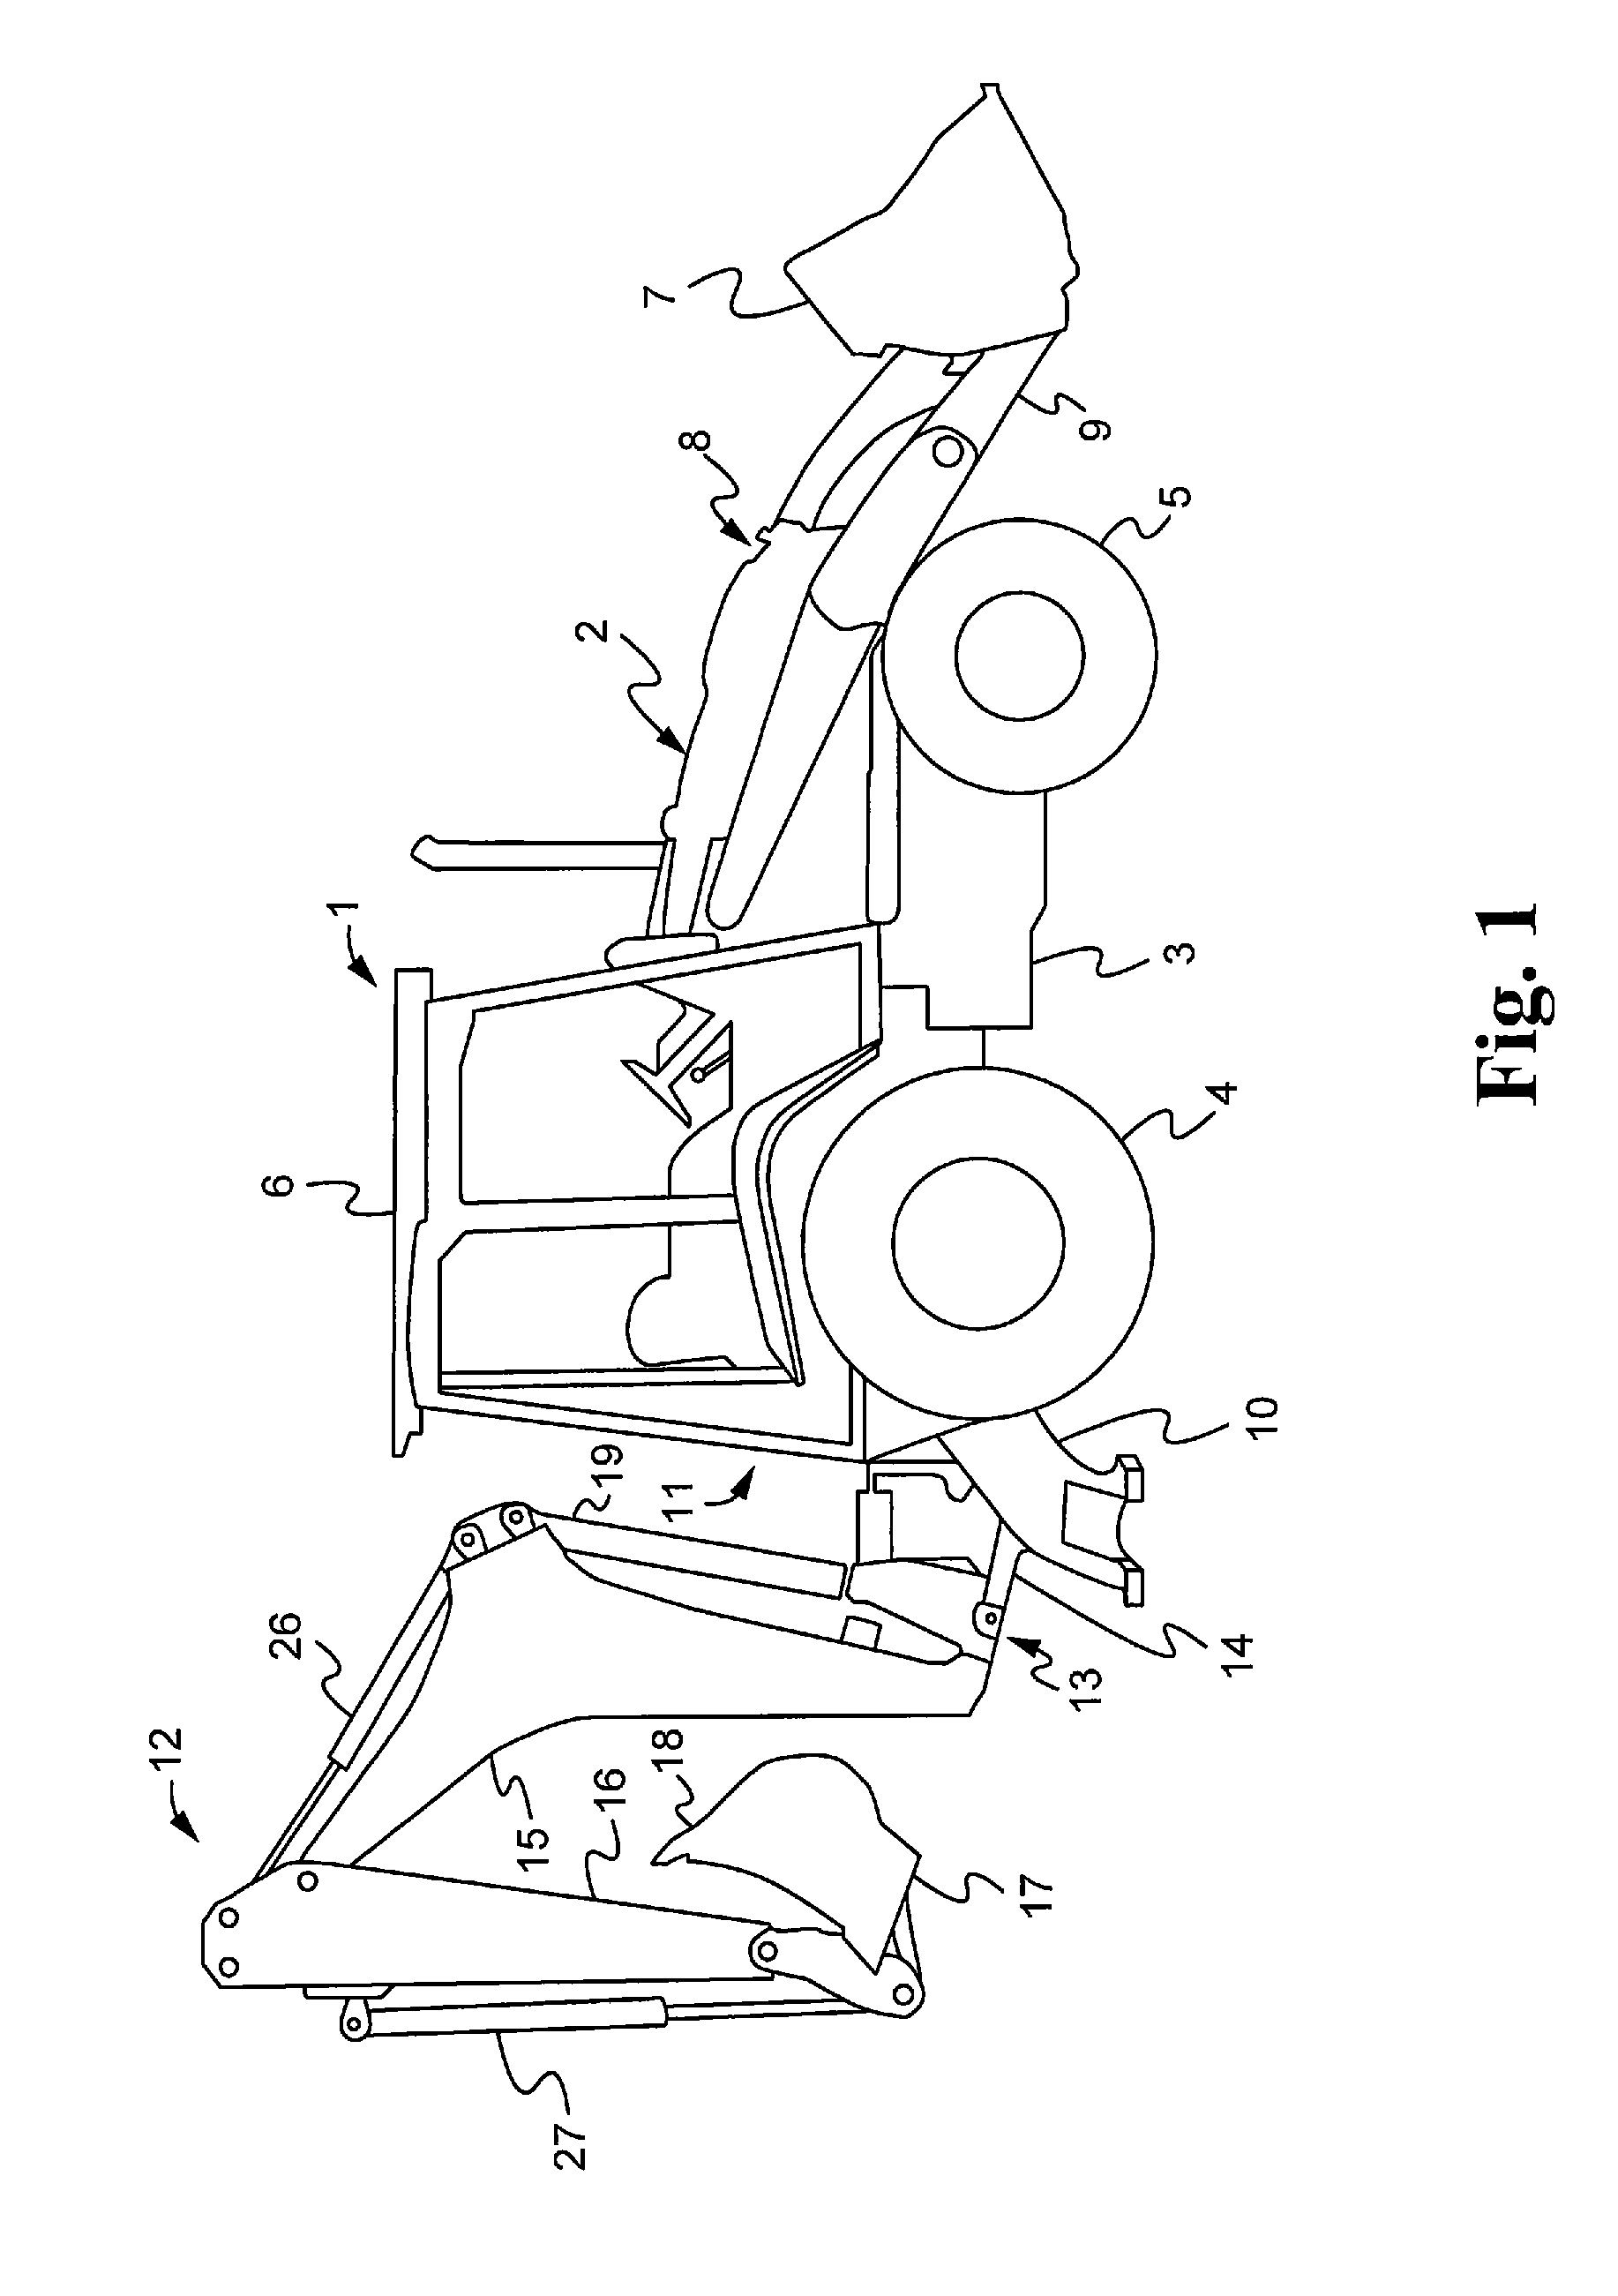 Multi-directionally adjustable control pods